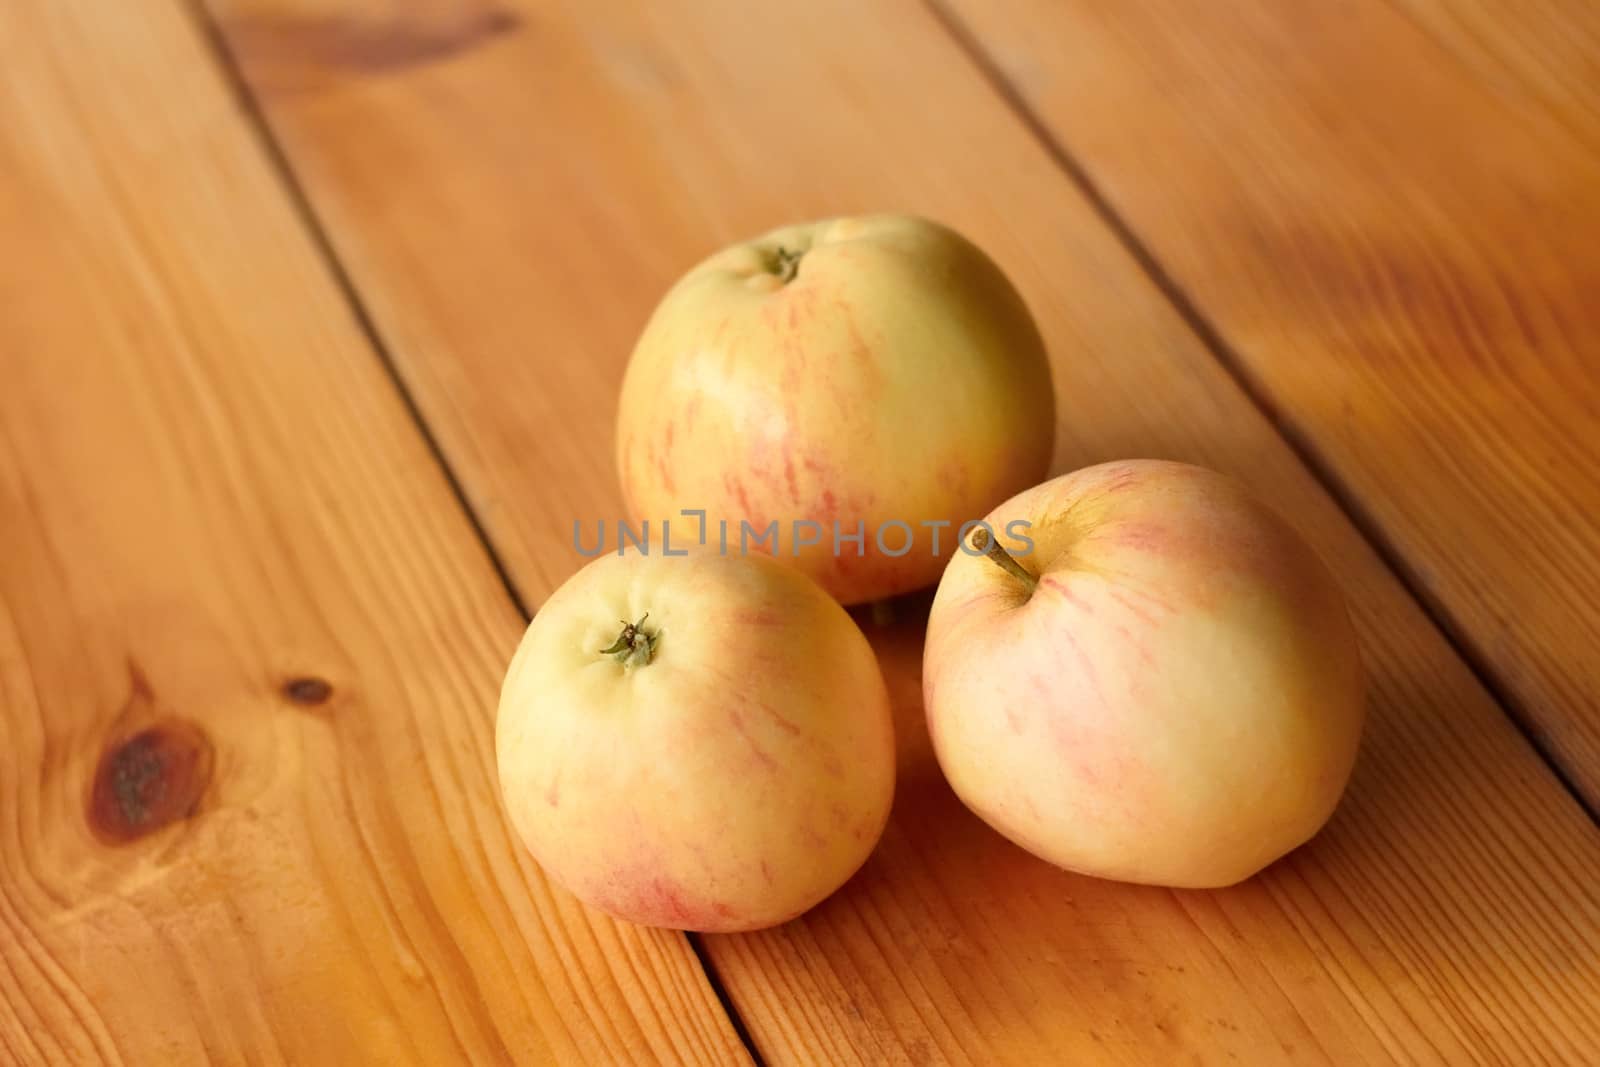 Three ripe apples on a lacquered wooden table